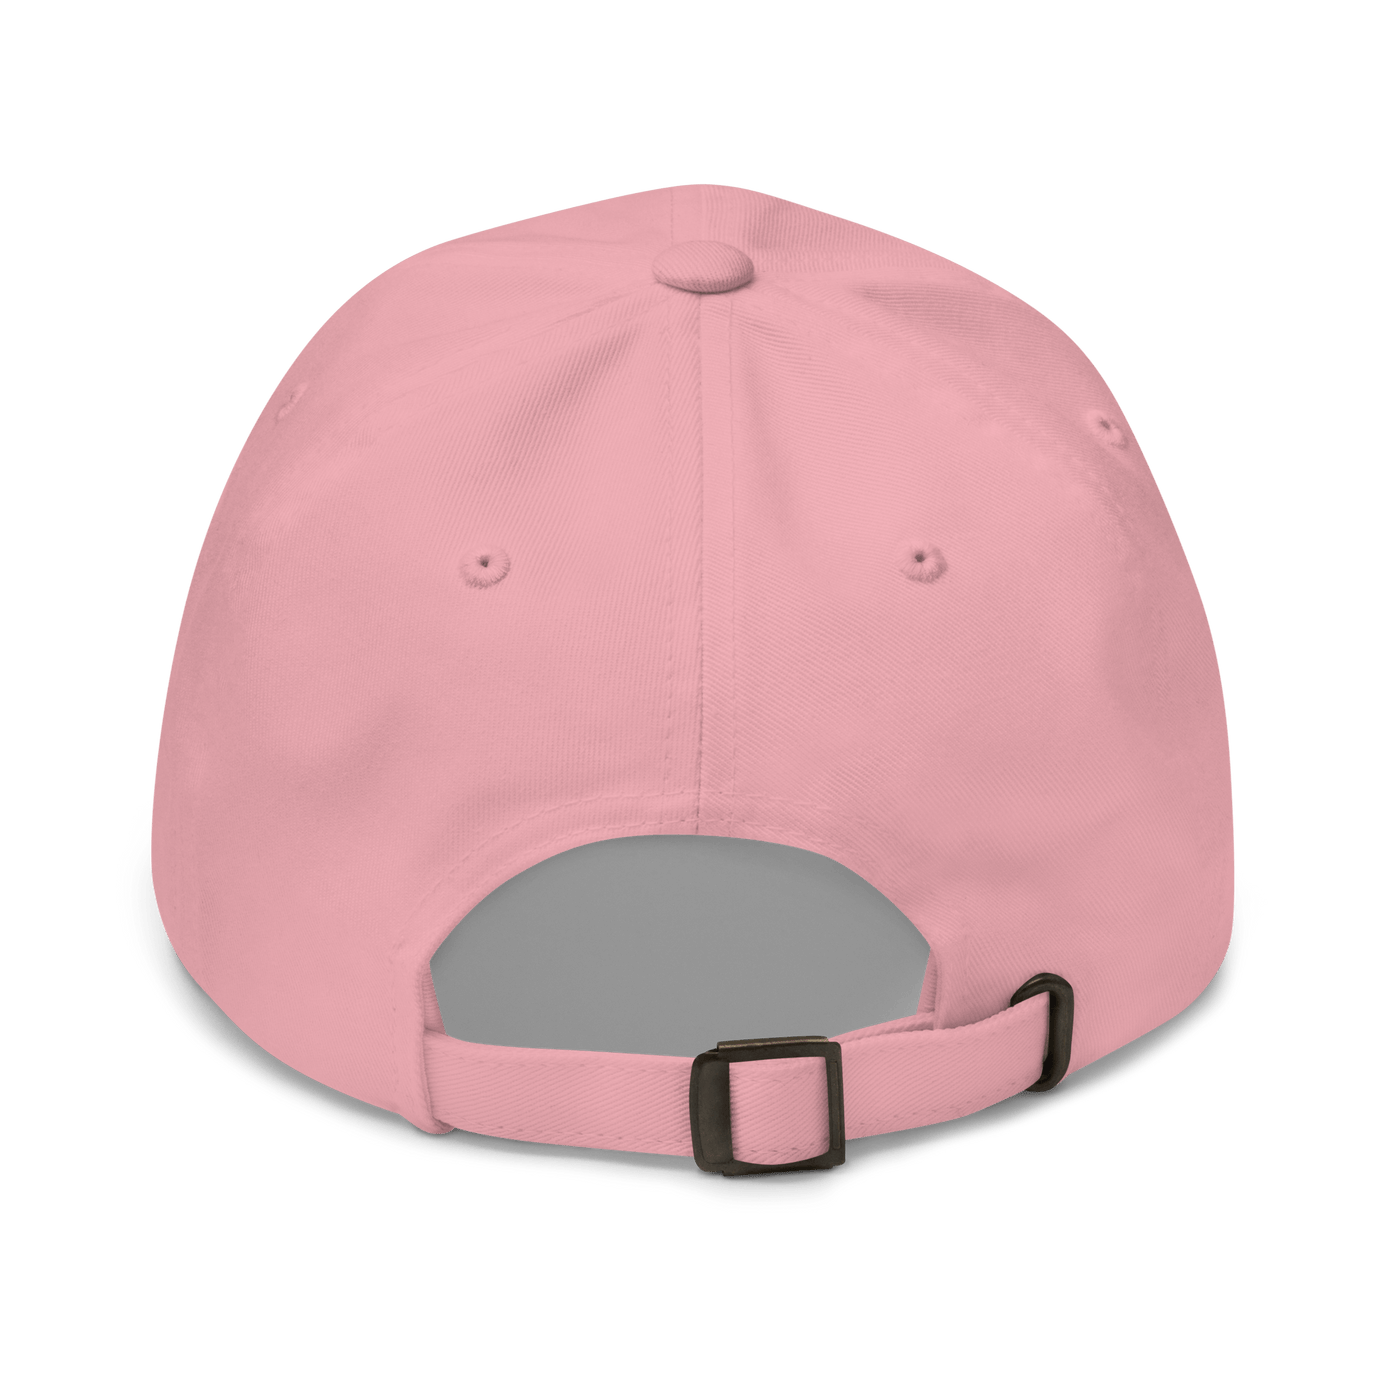 CEO of everything Dad hat - Pink - - Just Another Cap Store